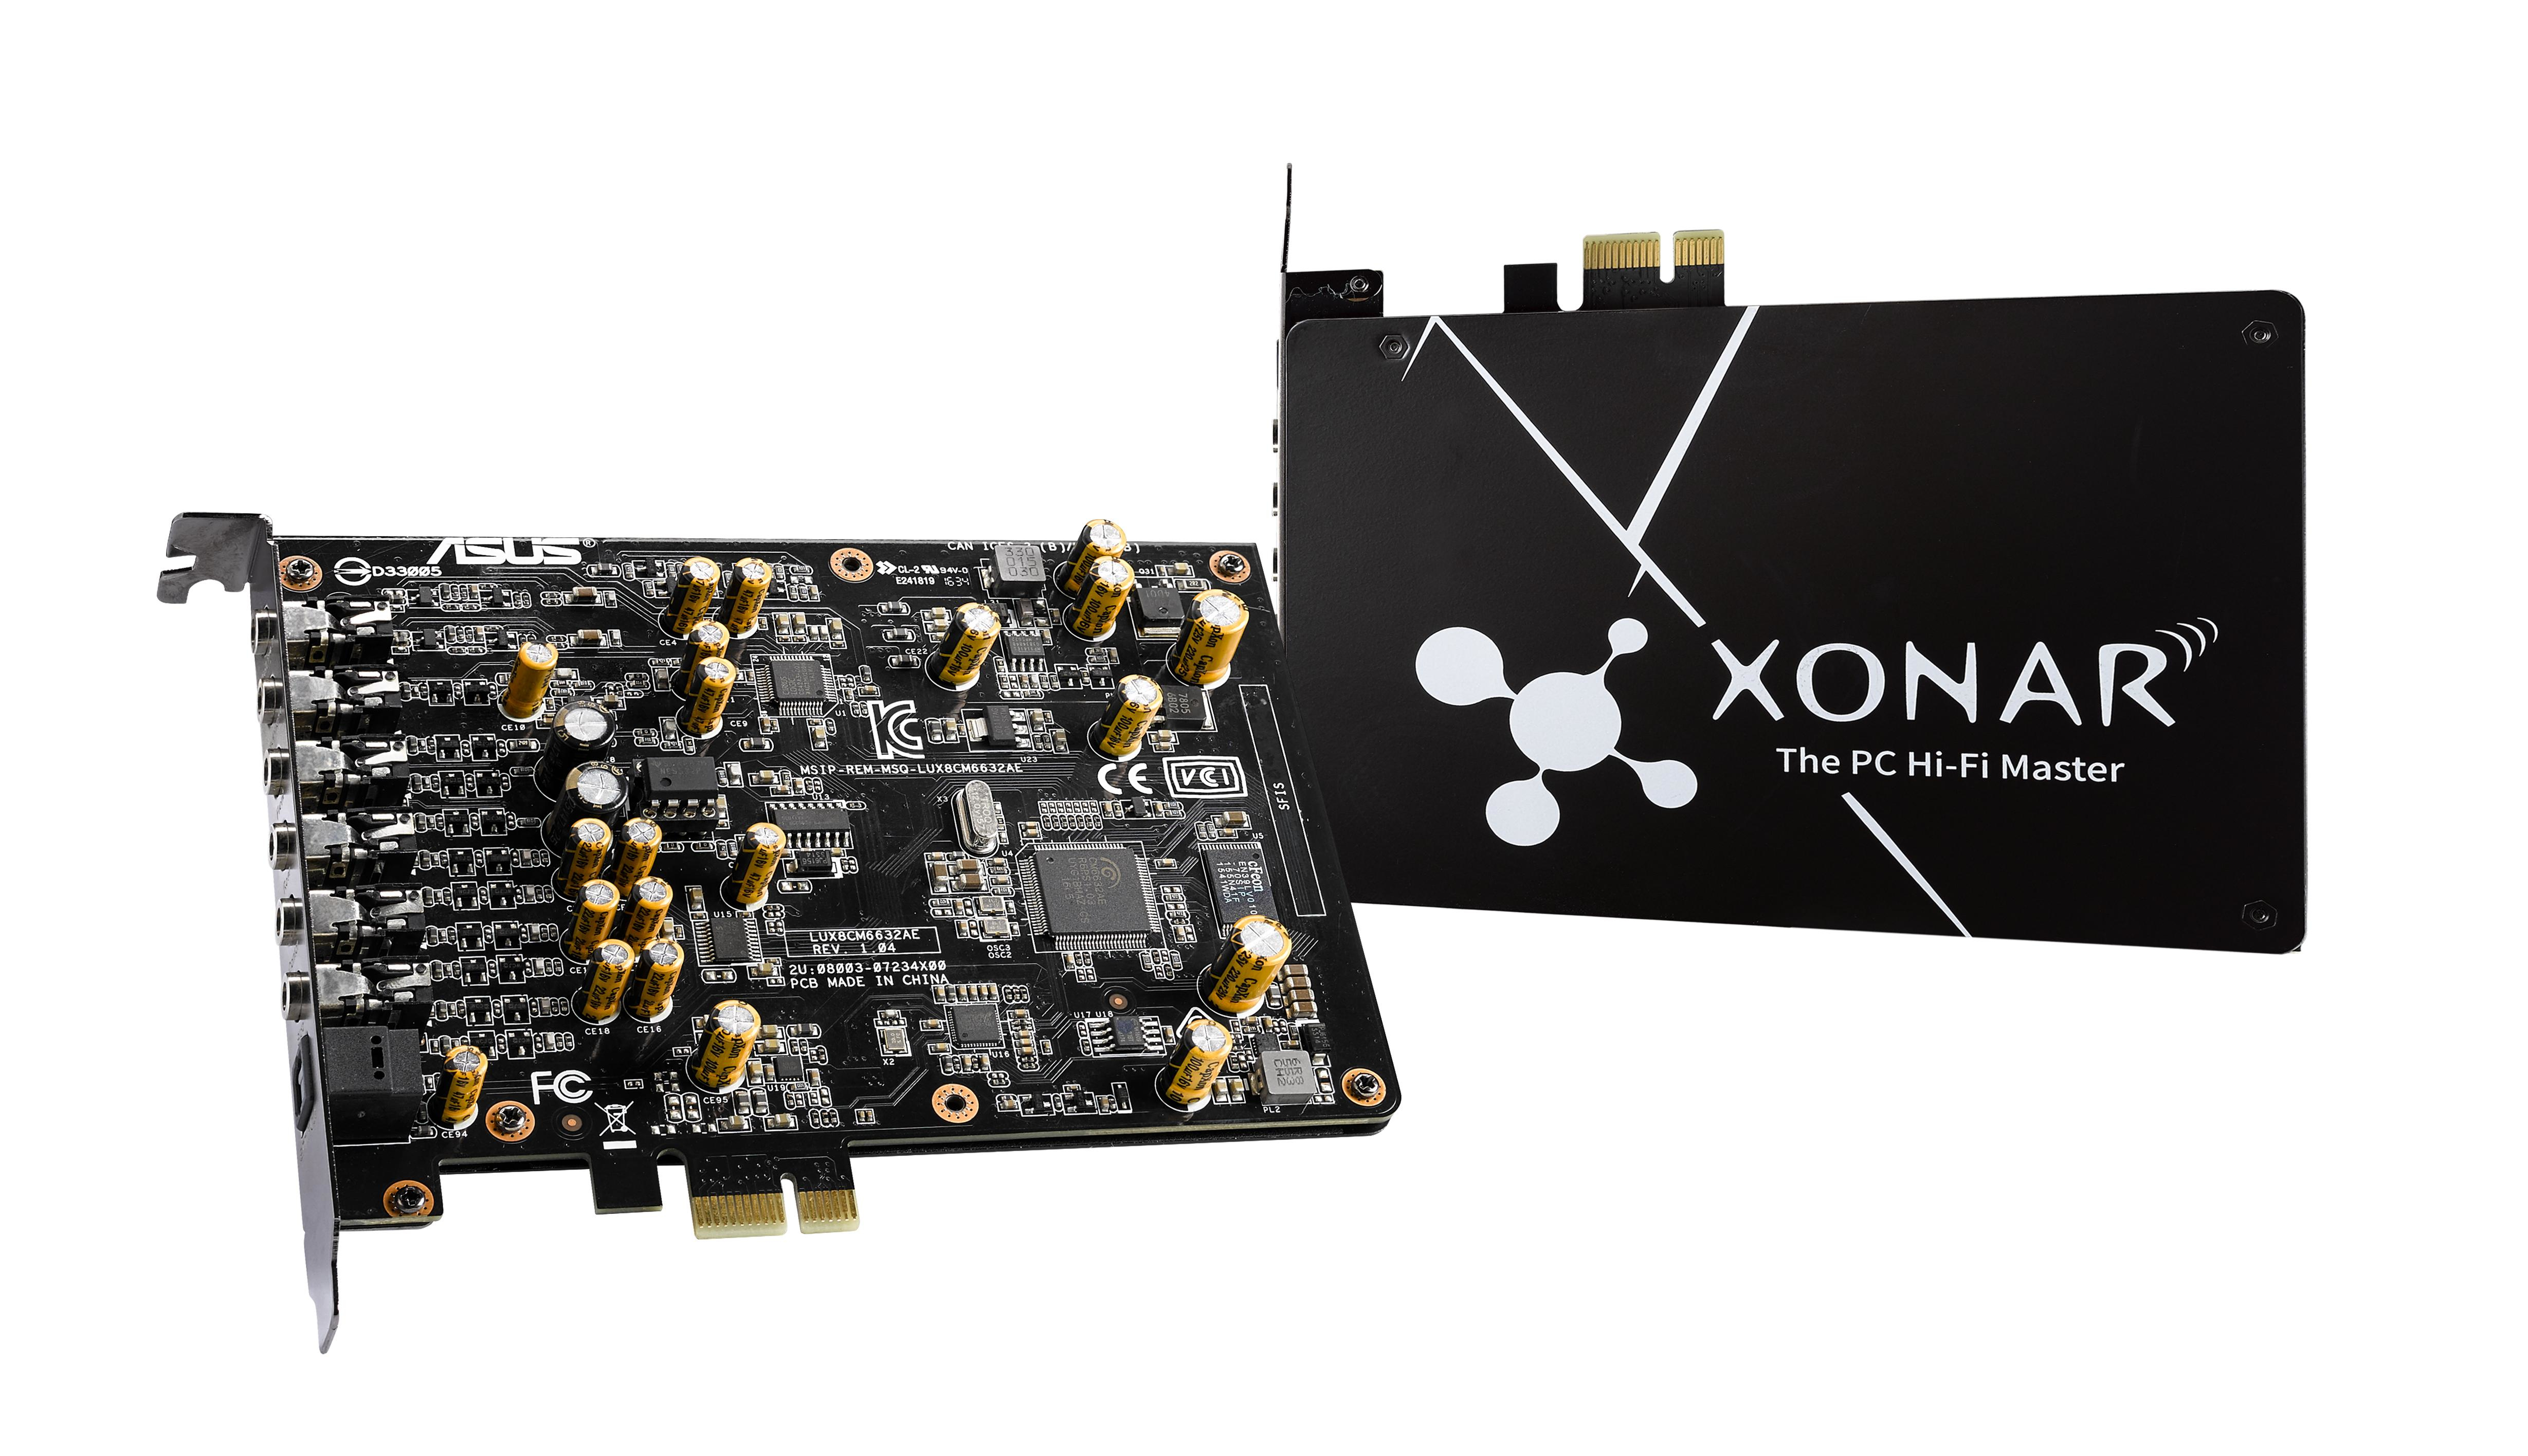 THE ASUS XONAR AE DELIVERS 7.1-CHANNEL, 192KHZ/24-BIT HI-RES AUDIO WITH A 110DB